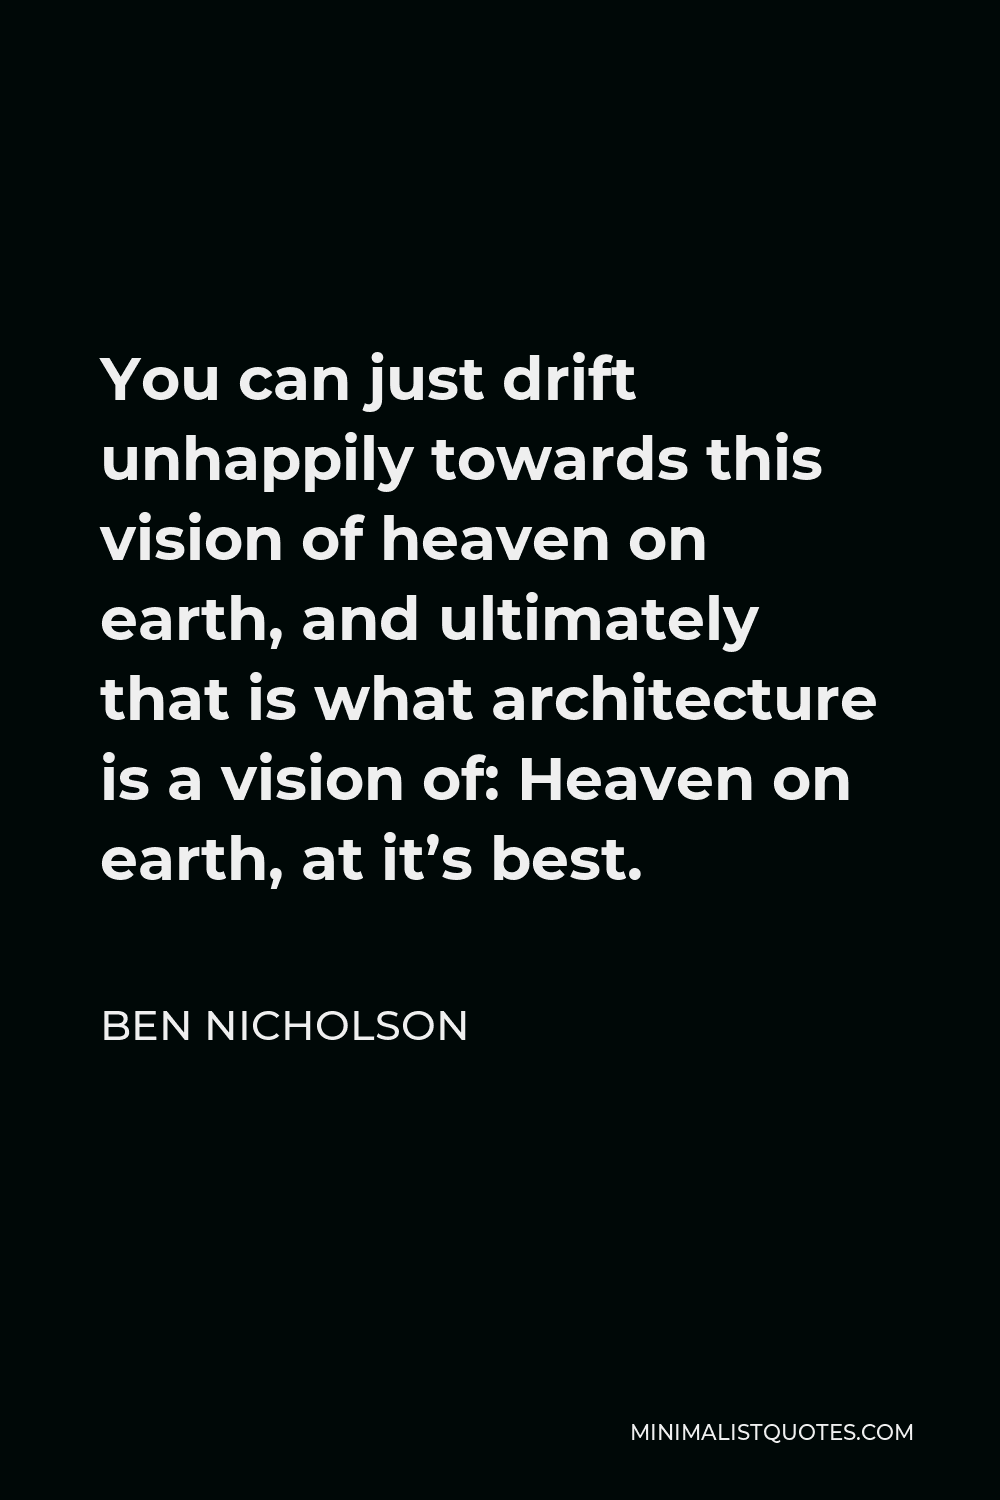 Ben Nicholson Quote - You can just drift unhappily towards this vision of heaven on earth, and ultimately that is what architecture is a vision of: Heaven on earth, at it’s best.